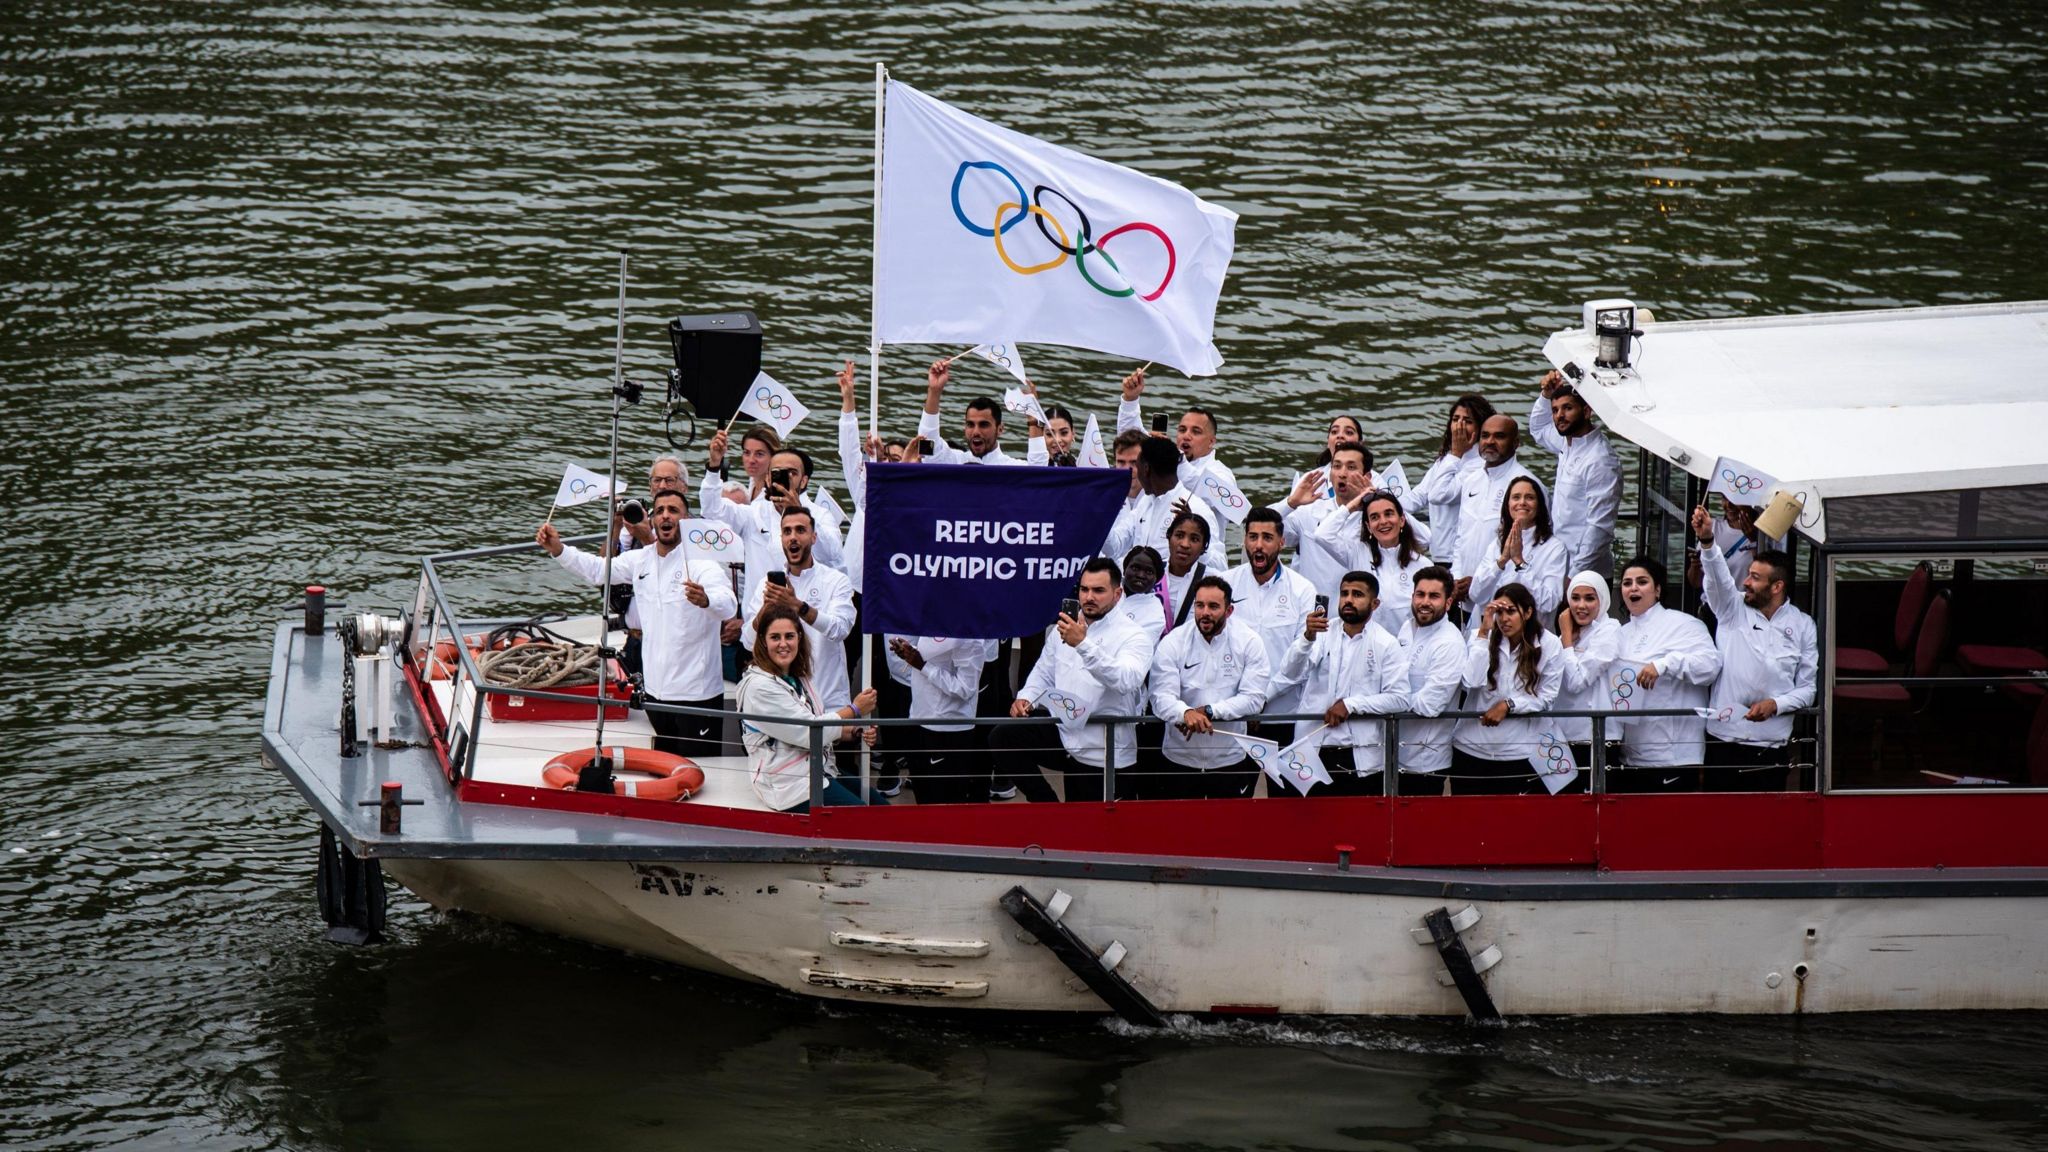 The boat carrying the Refugee Olympic Team sails down the Seine during the Paris 2024 Opening Ceremony